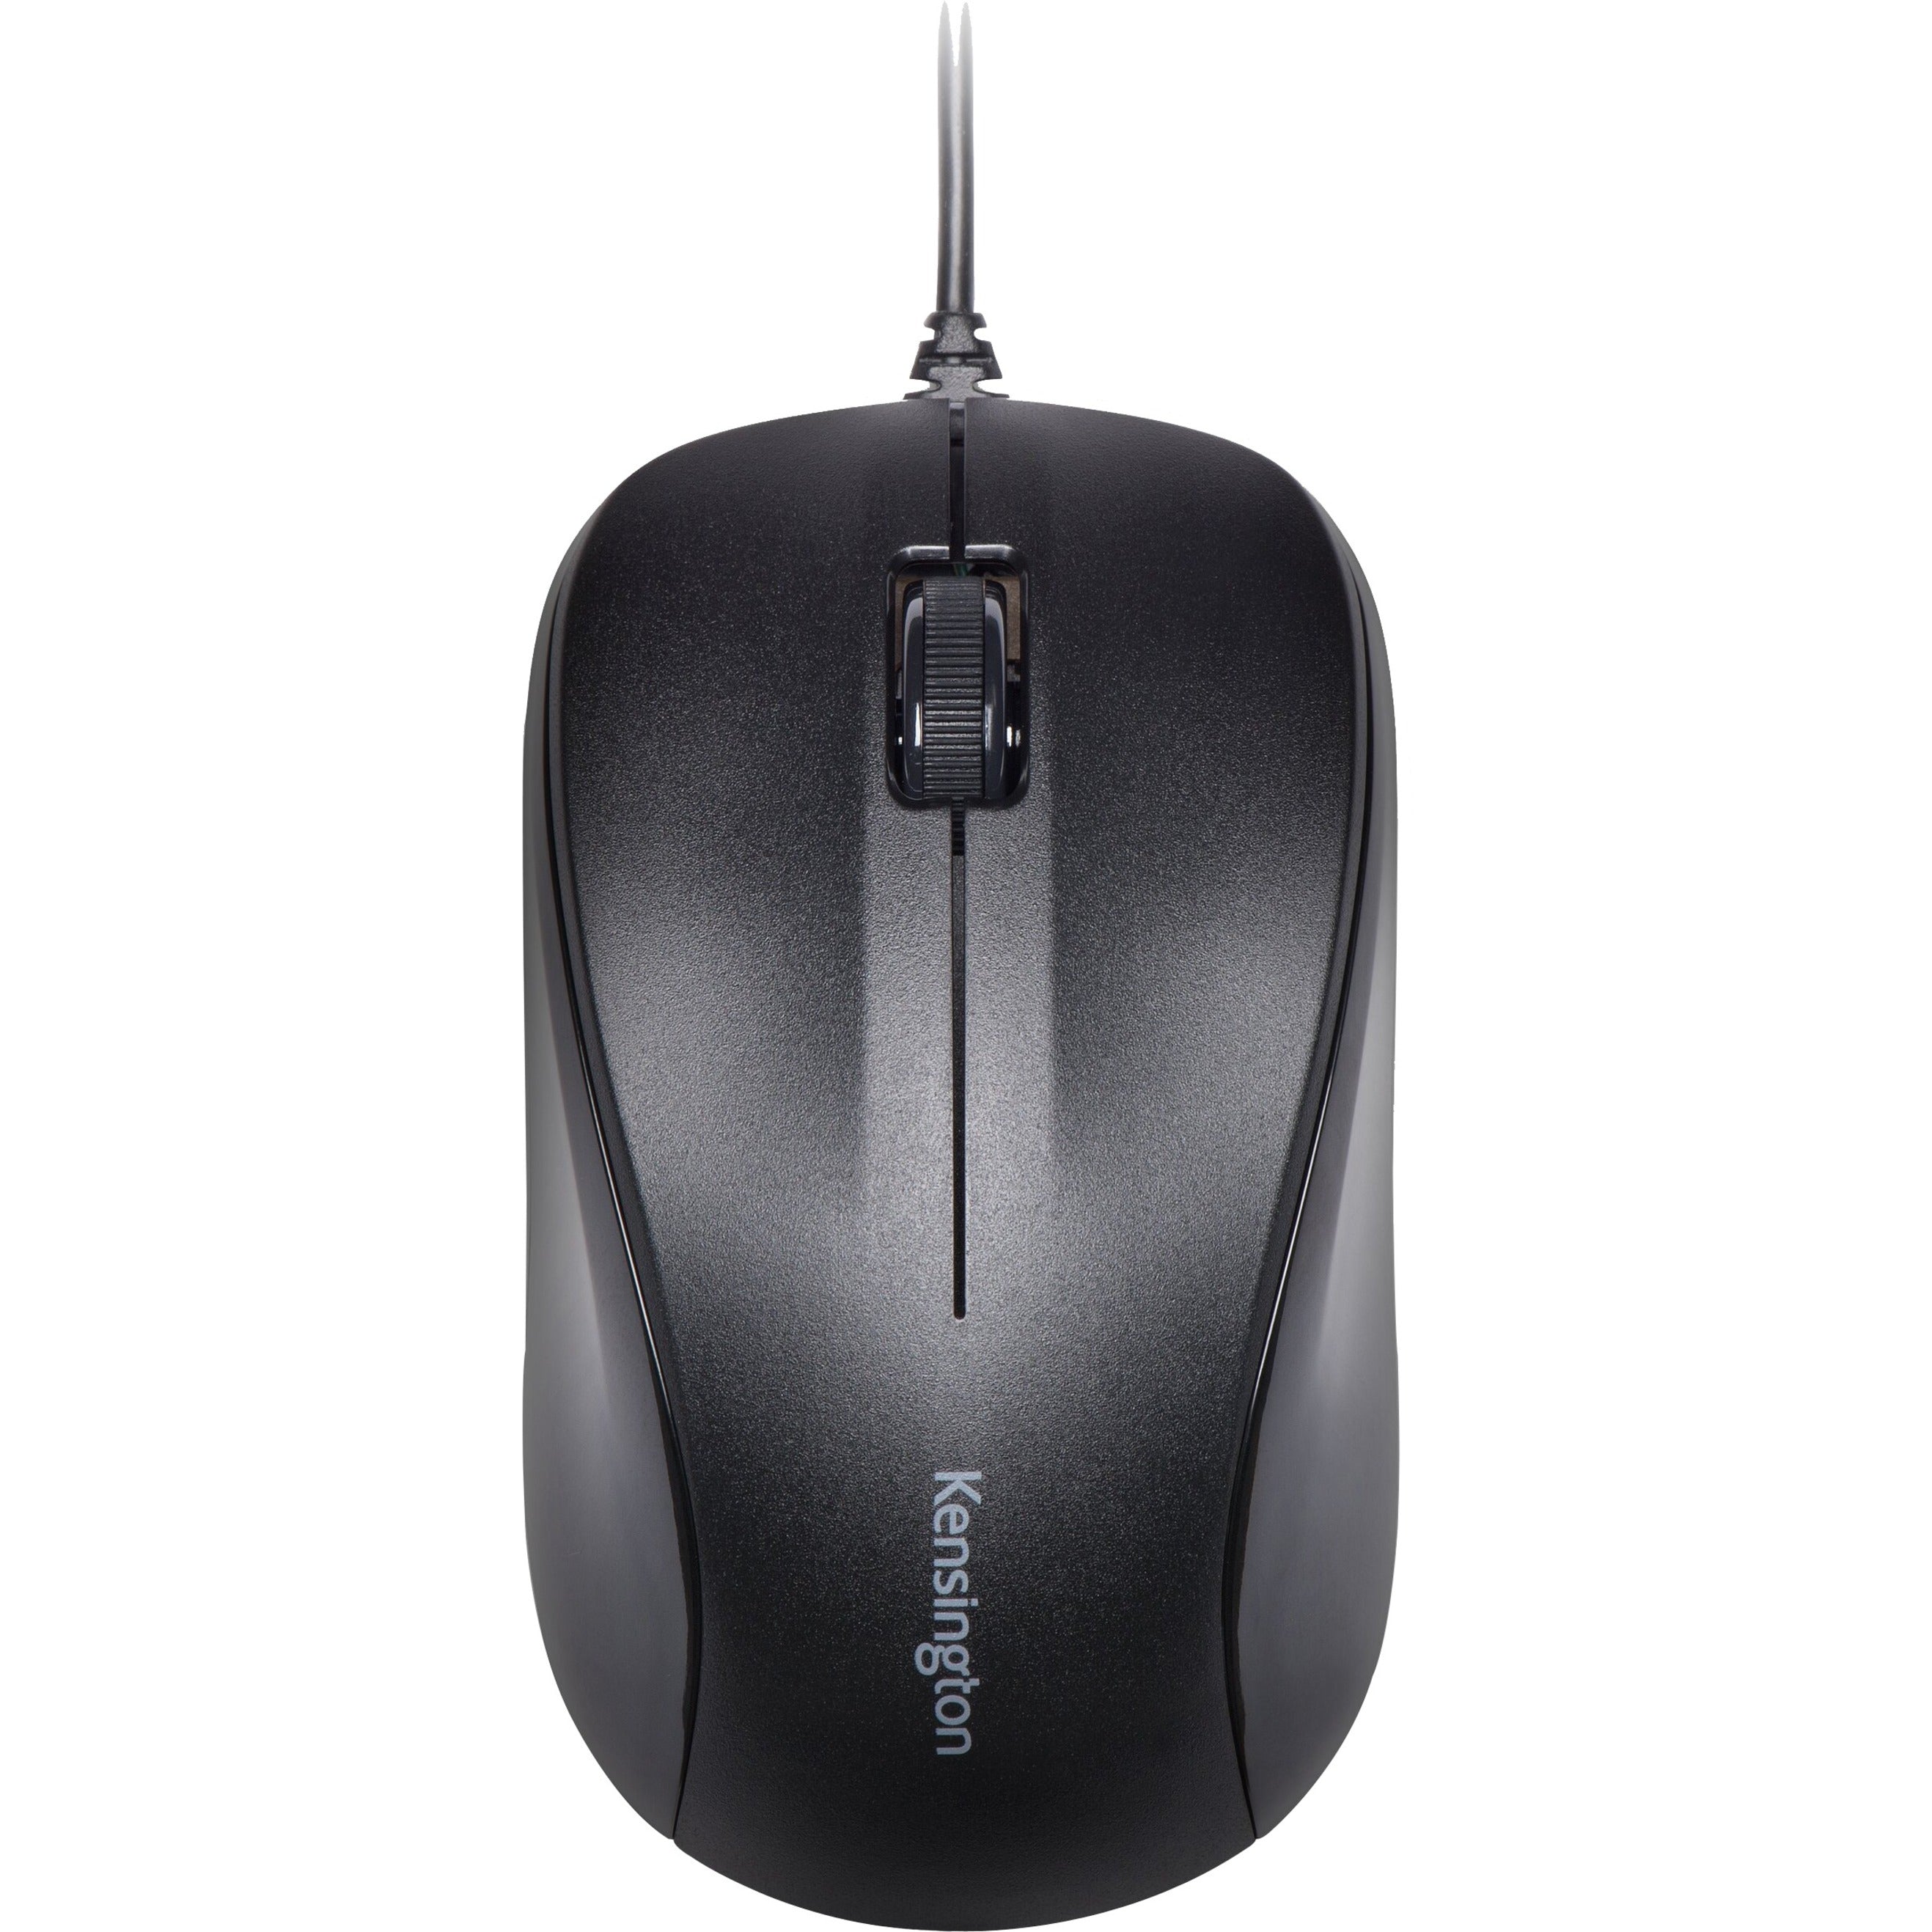 Kensington K72110WW Mouse for Life USB Three-Button, Ergonomic Fit, Scroll Wheel, Optical, PC Compatible